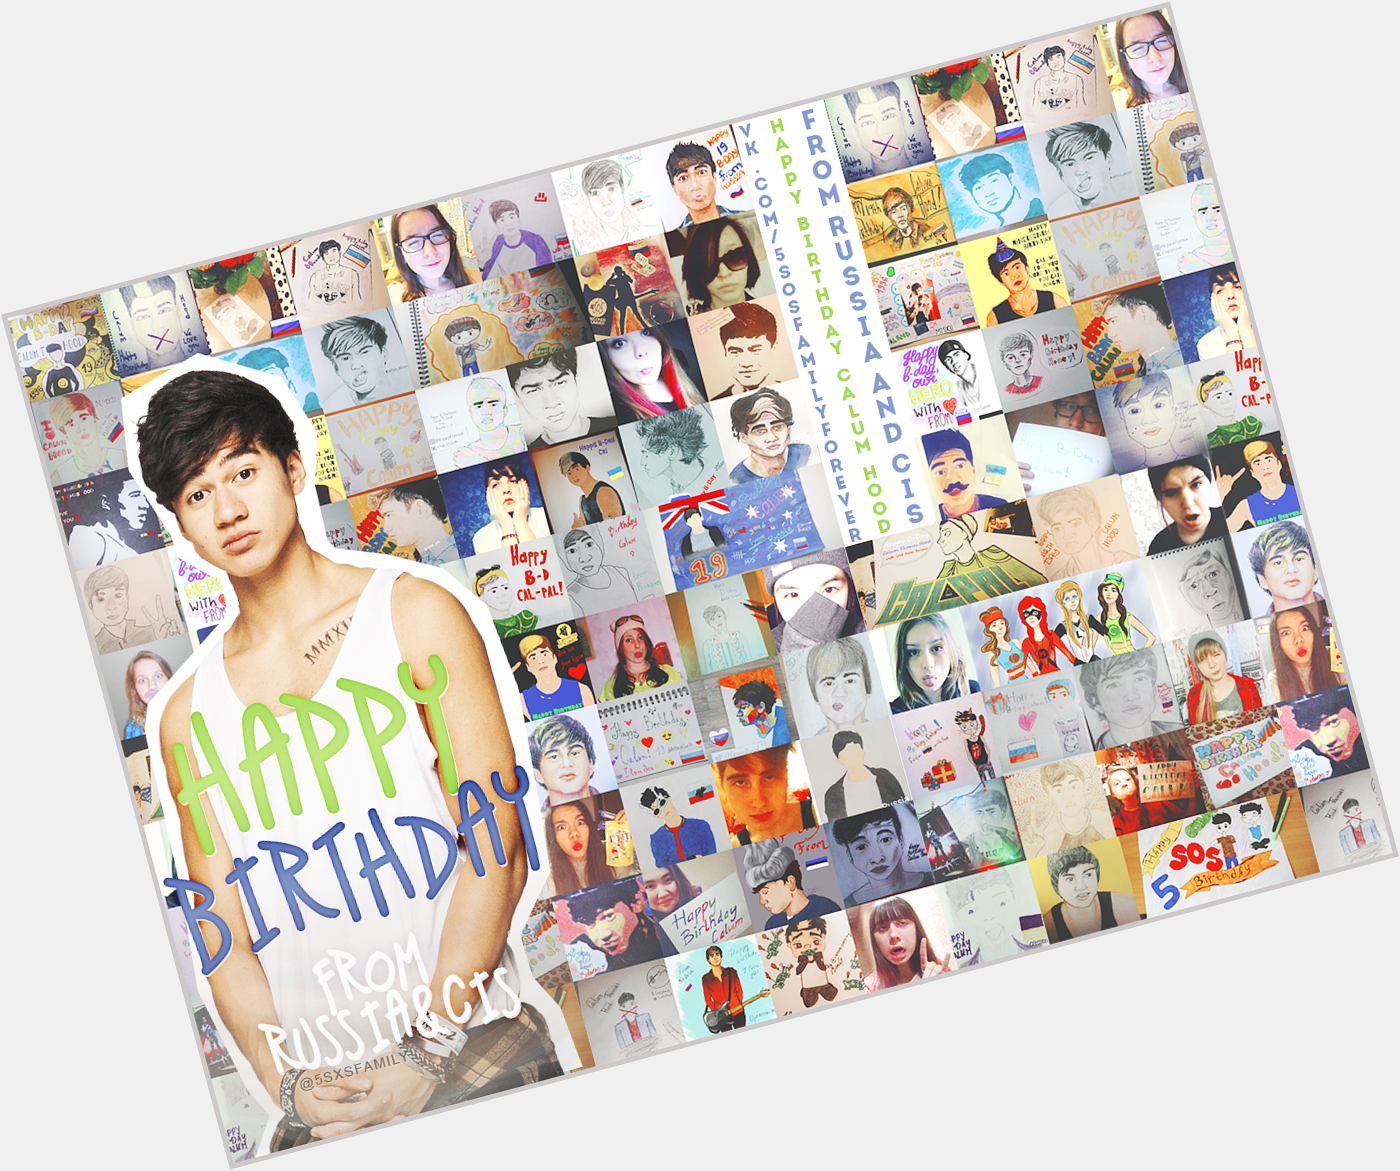 Calum Hood, I love you so much! Happy Birthday from Russia and CIS! 2 